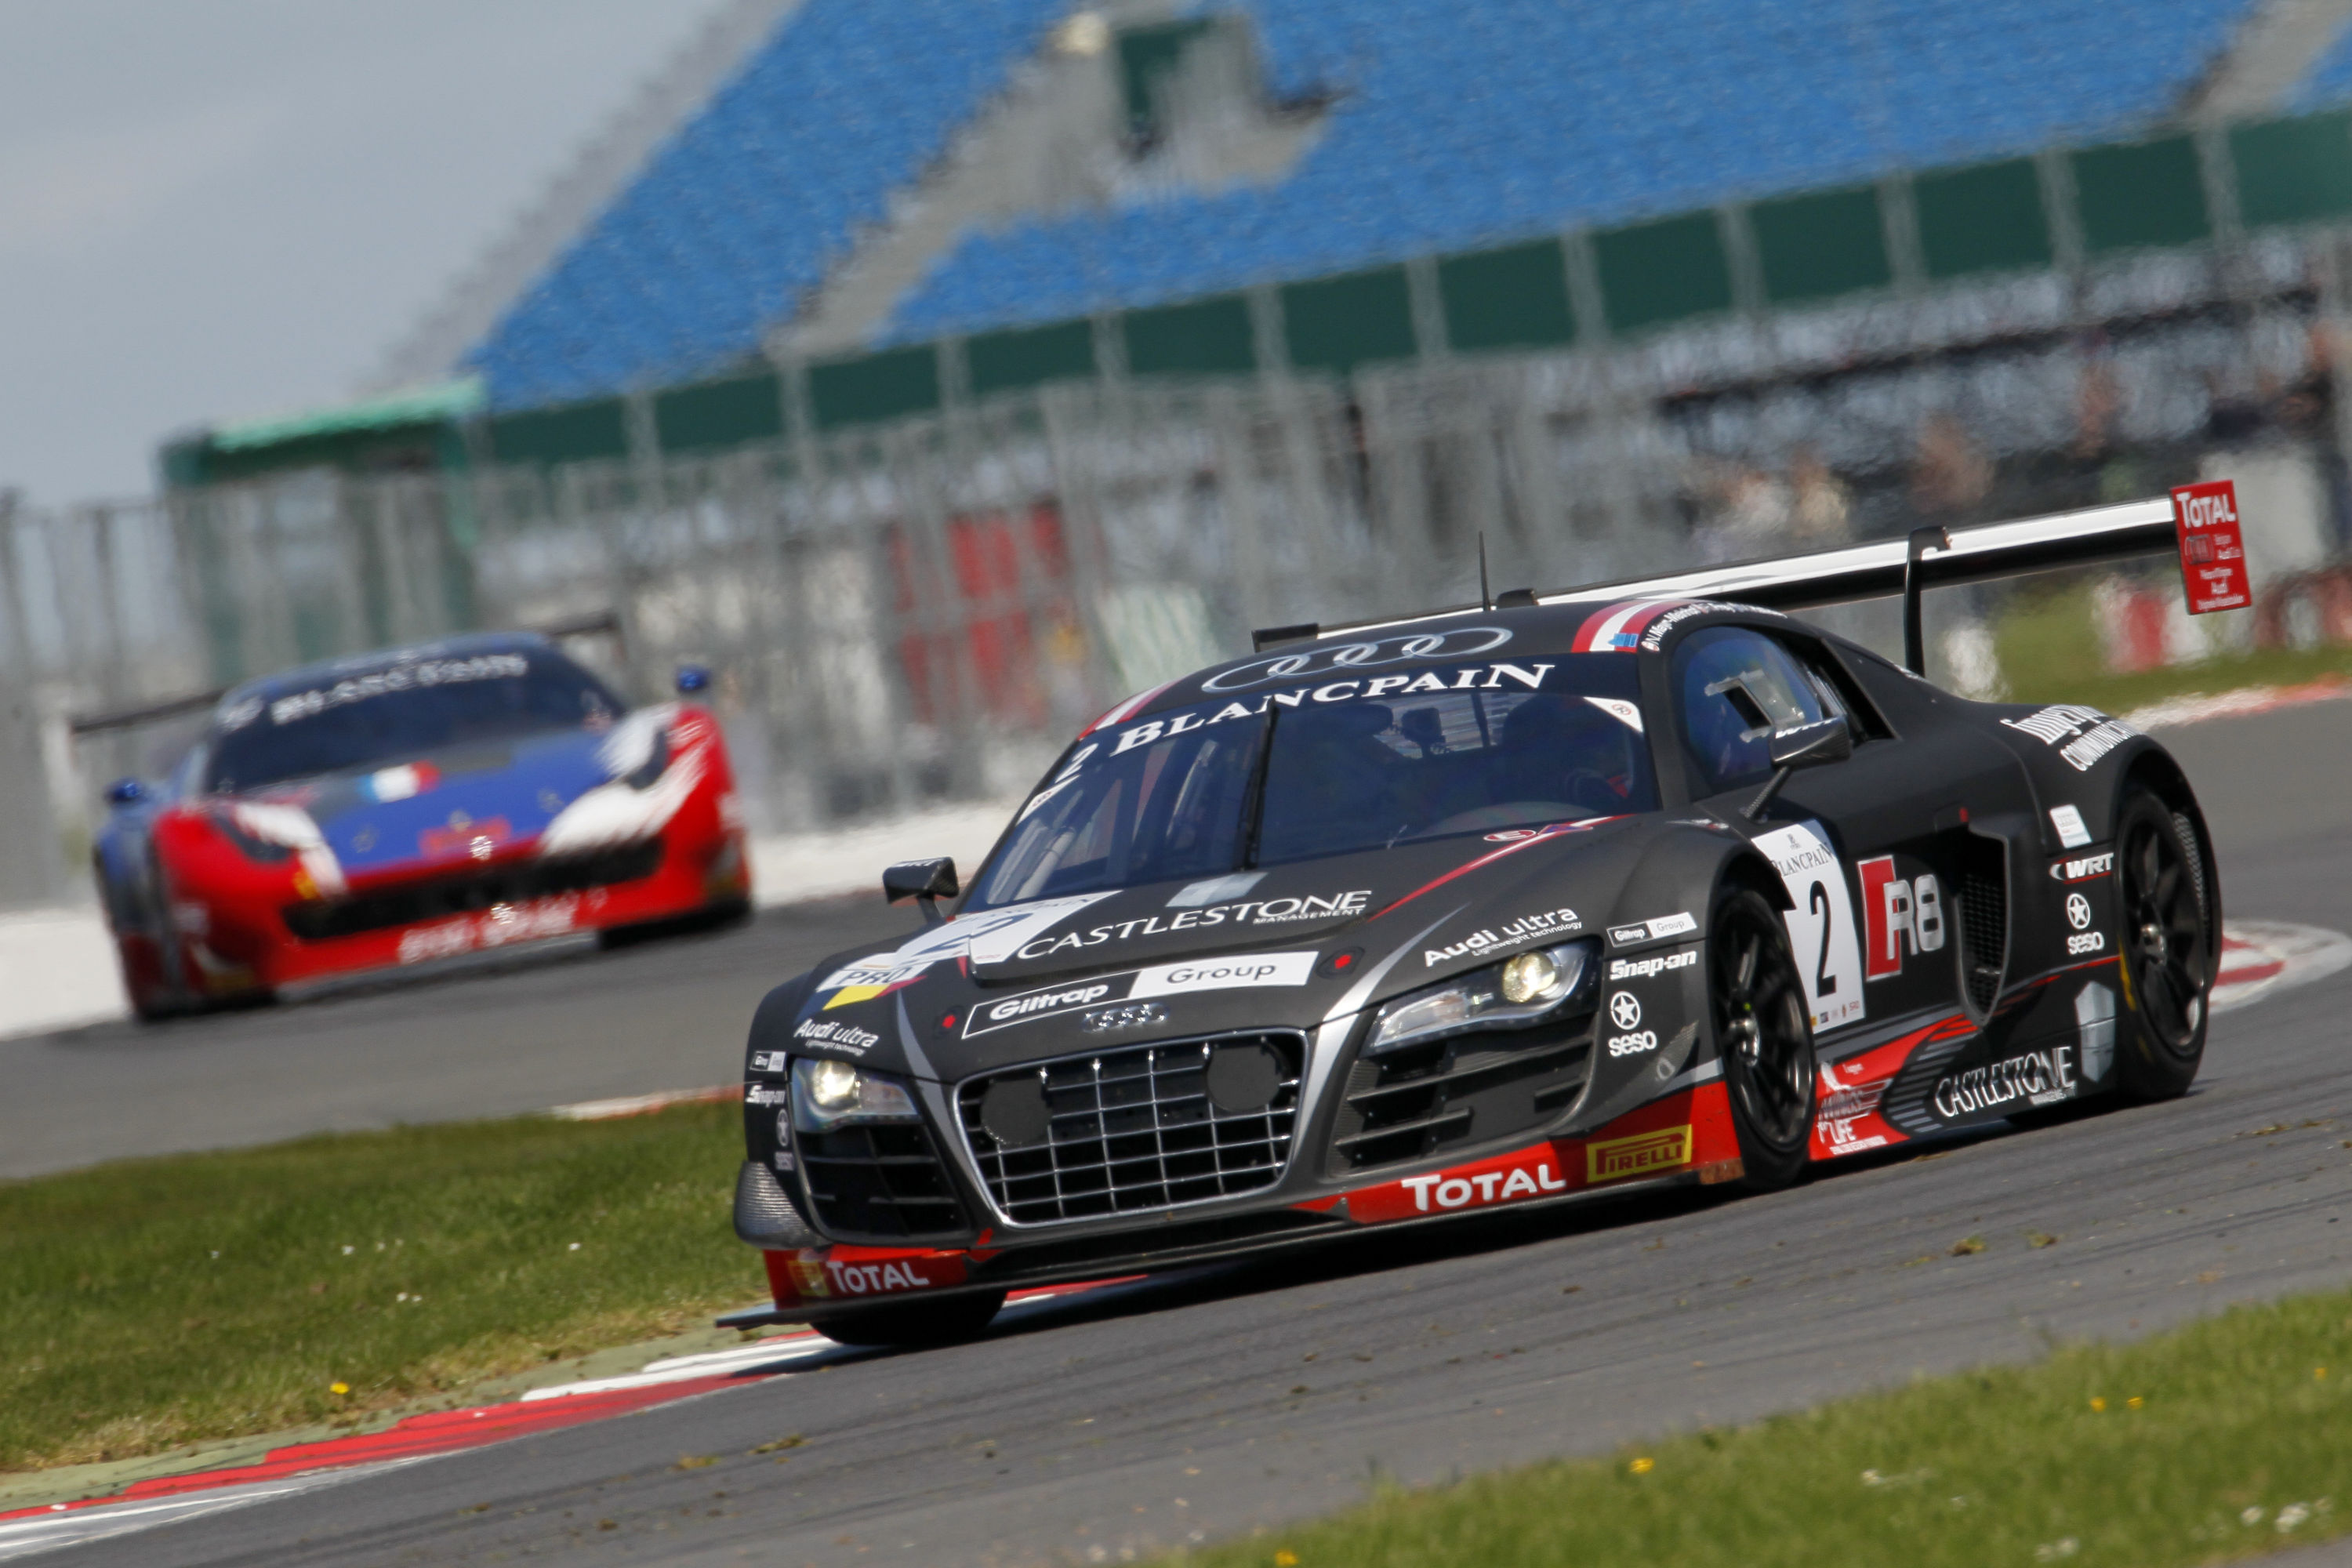 Halliday 8th in busy Silverstone Blancpain race